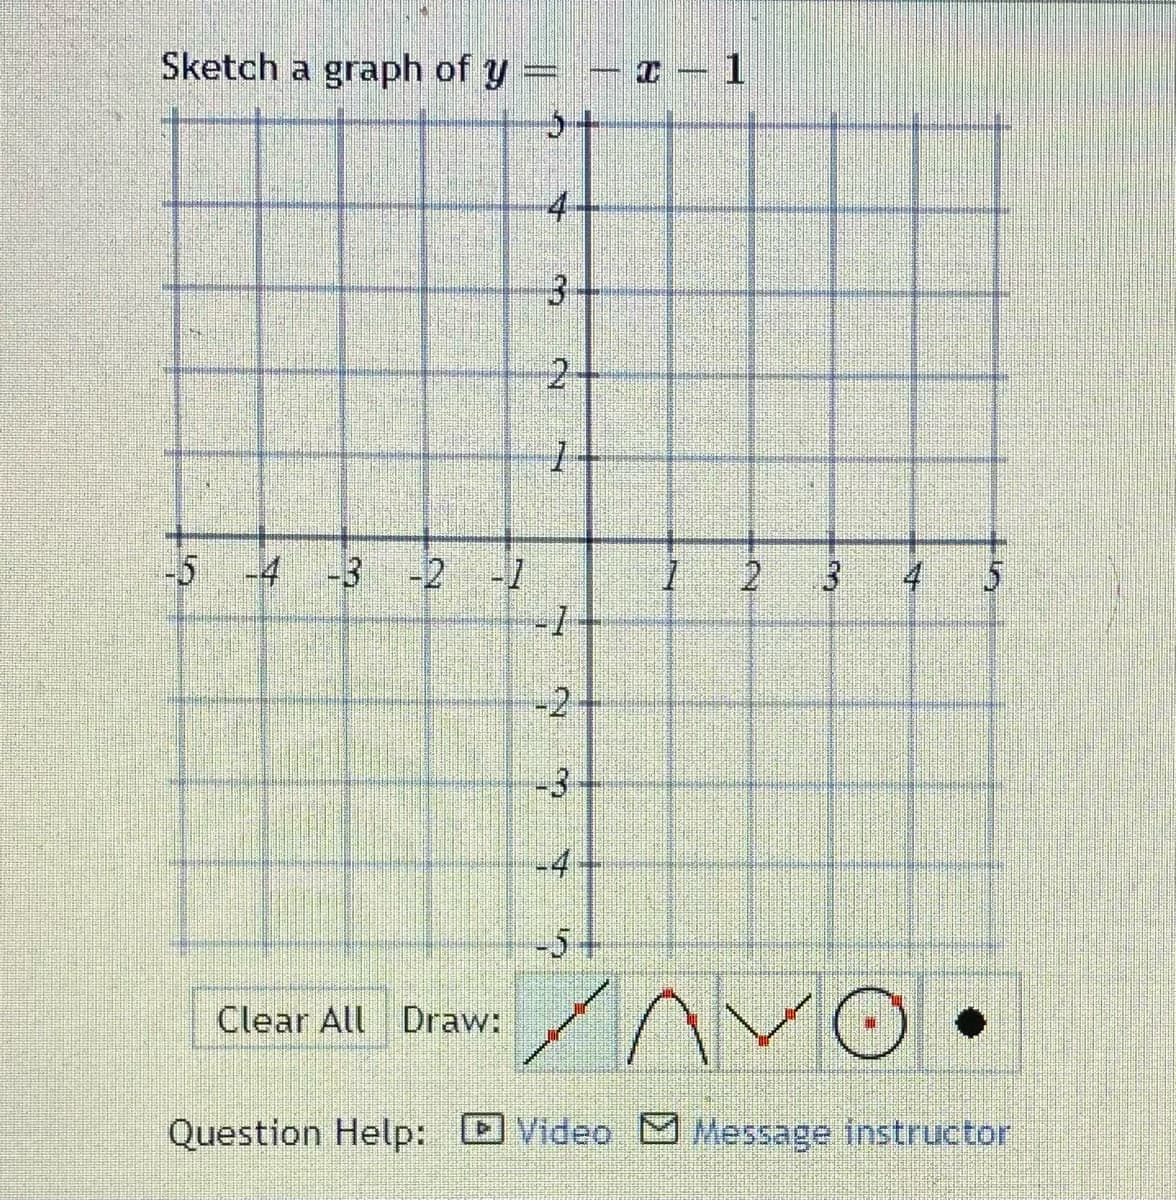 Sketch a graph of y - - 1
4-
1-
-5
-4 -3 -2
2.
4
-2
-3
-4
-5+
Clear All Draw:
Question Help:
Video MMessage instructor
3.
3.
2.
